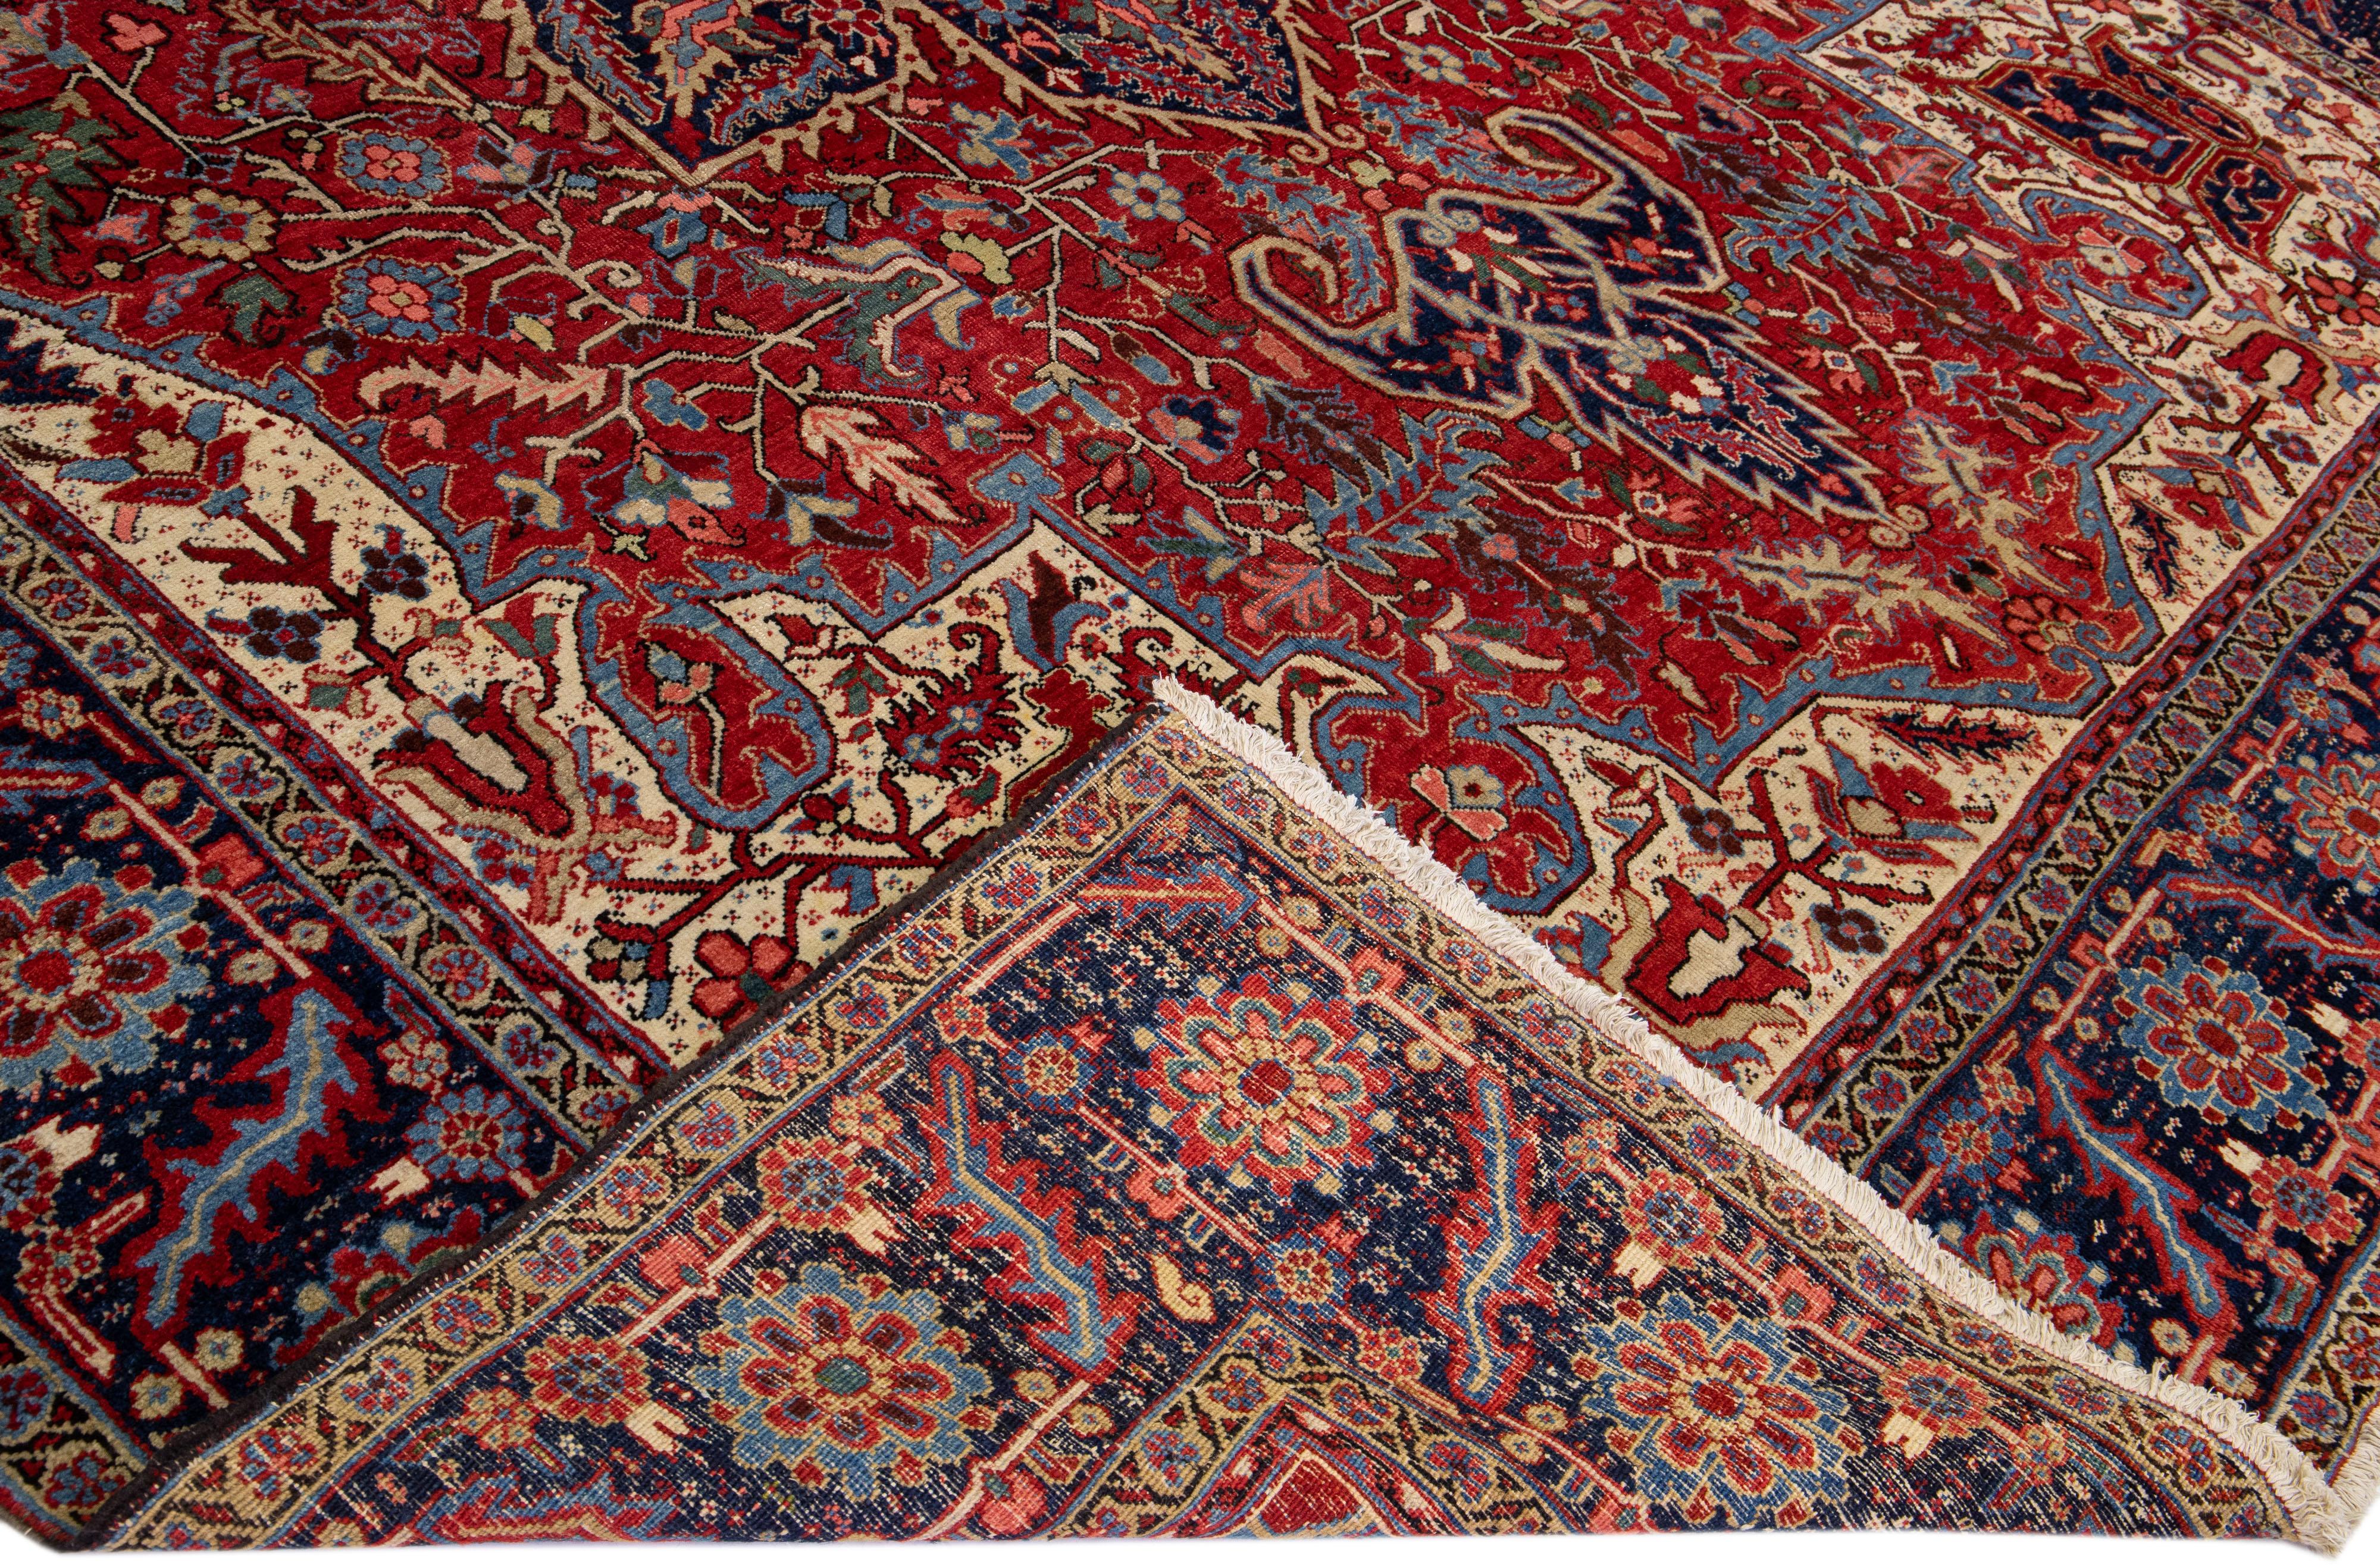 Beautiful Antique Heriz Serapi hand-knotted wool rug with a red field. This Persian rug has a navy blue frame with multi-color accents that feature a gorgeous all-over medallion design.

This rug measures: 11'4